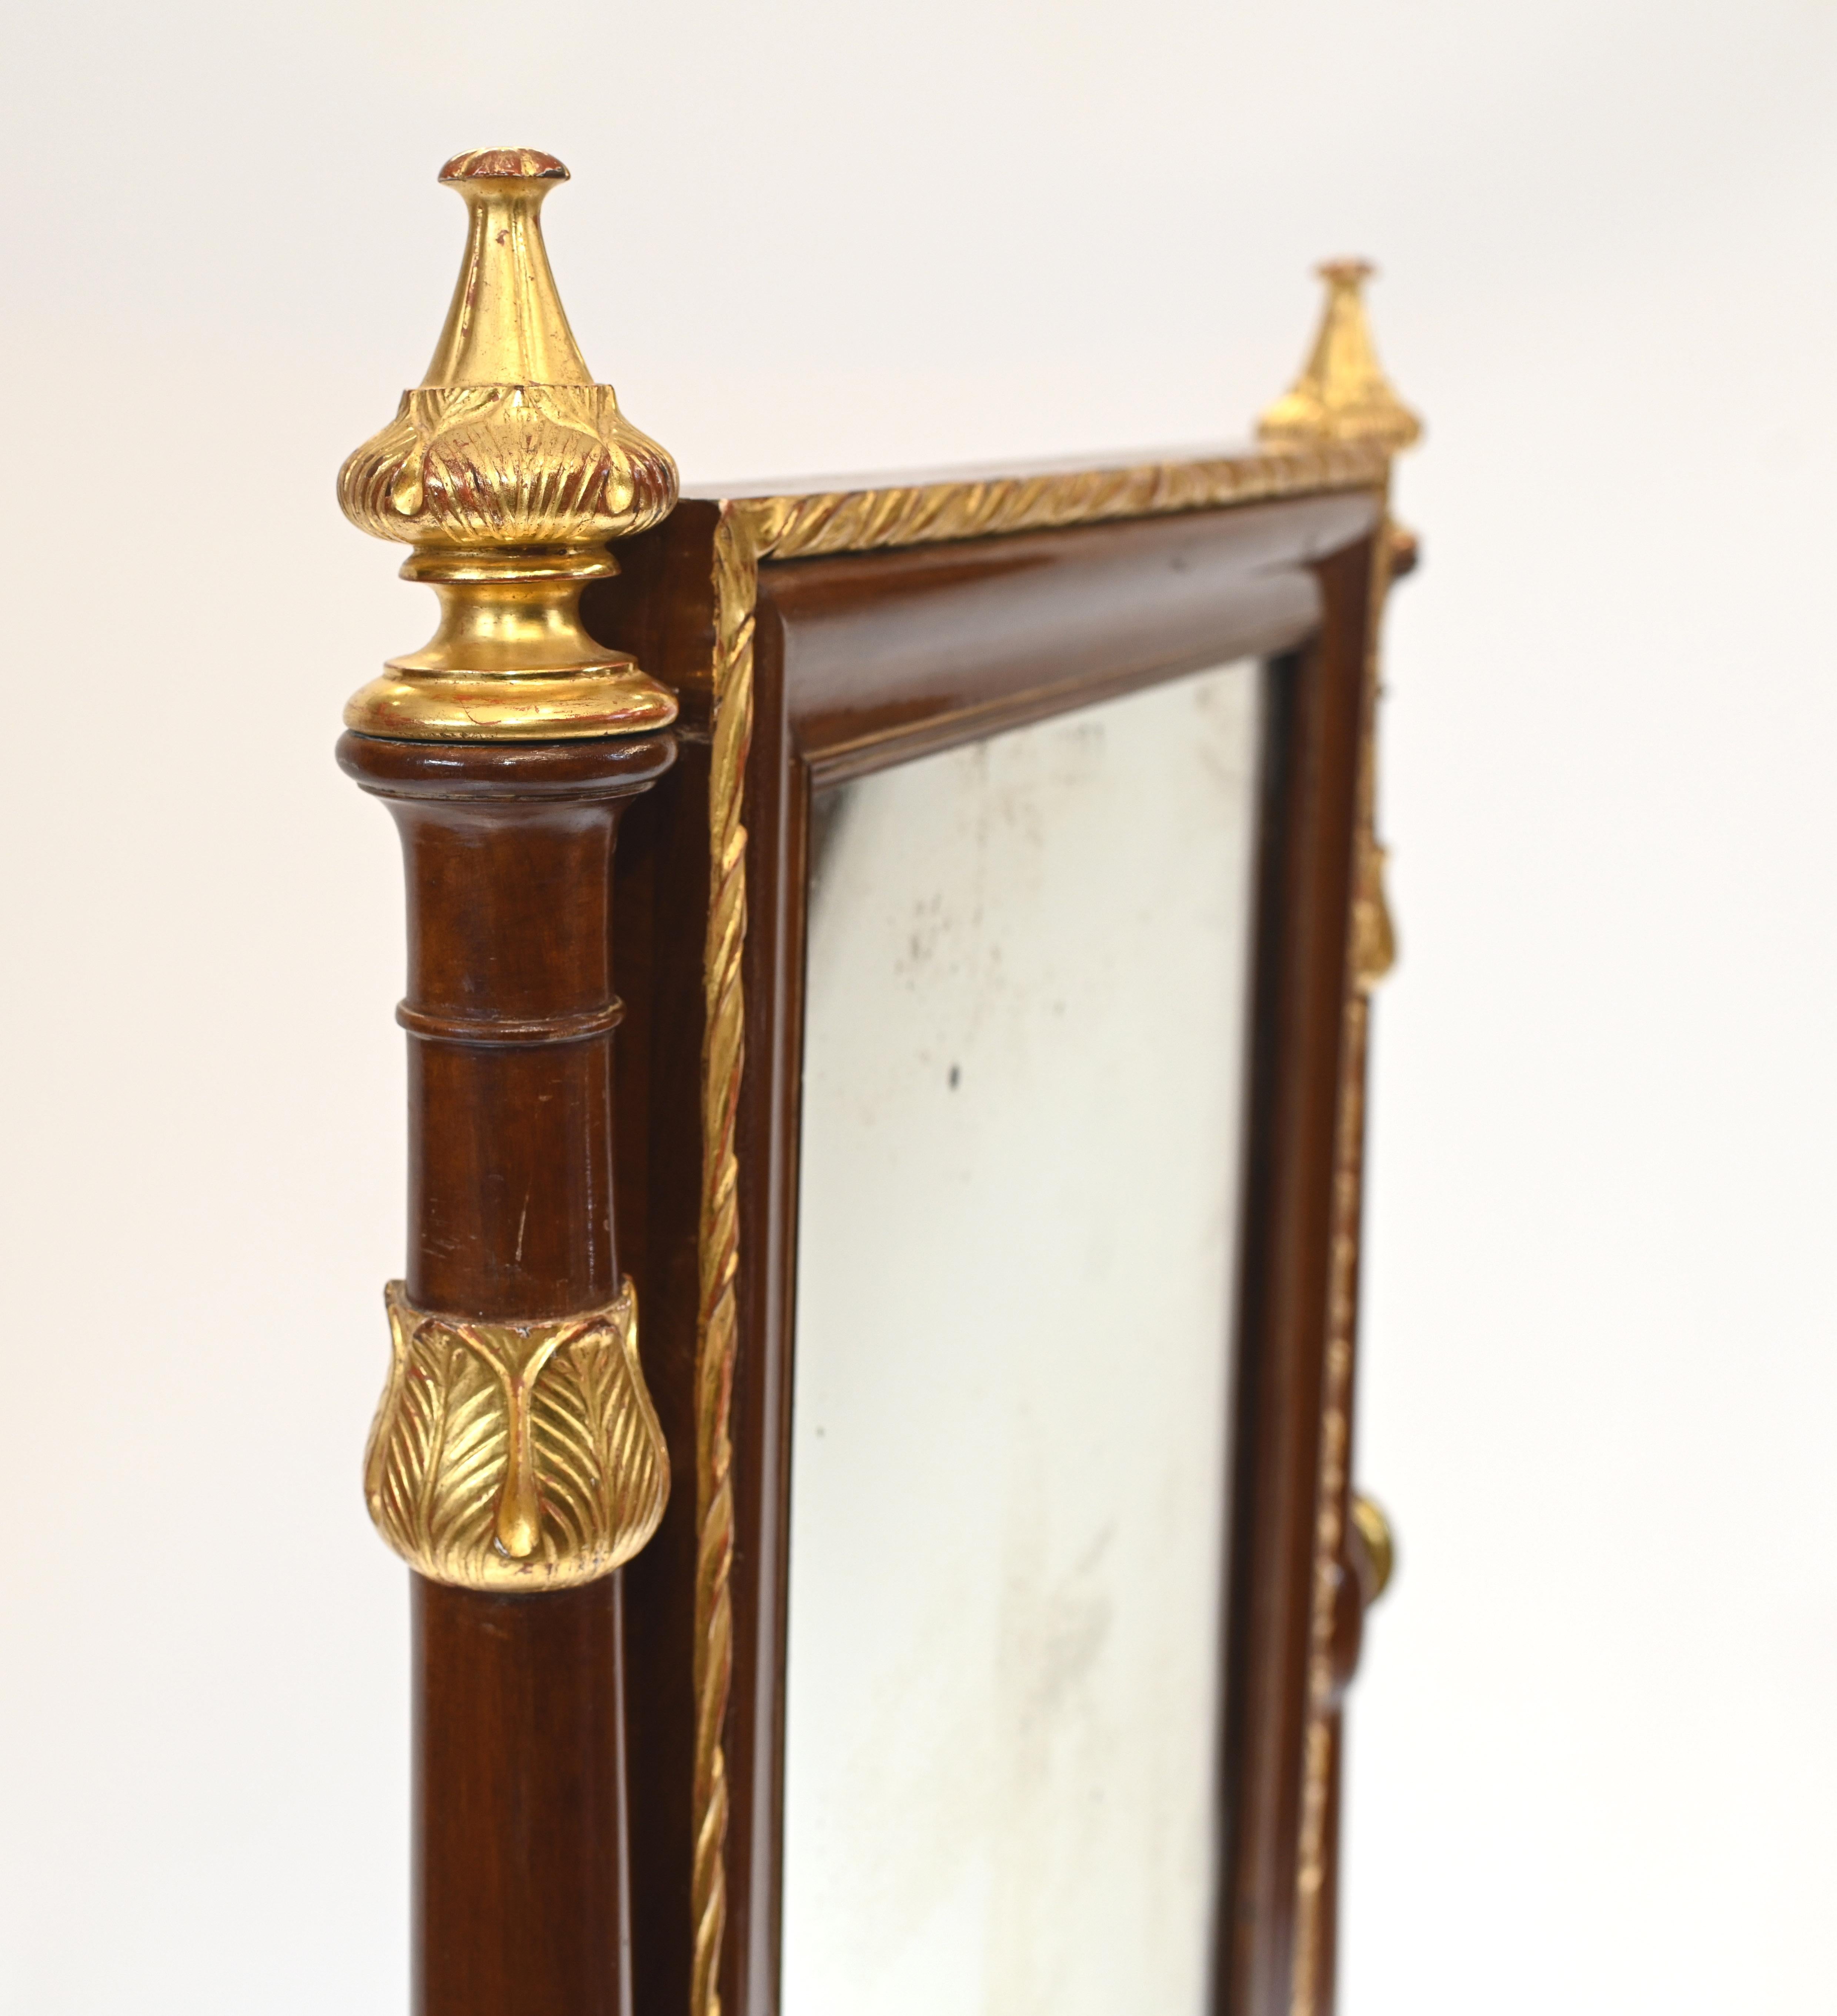 French Cheval Mirror Mahogany Gilt Antique 1890 For Sale 2